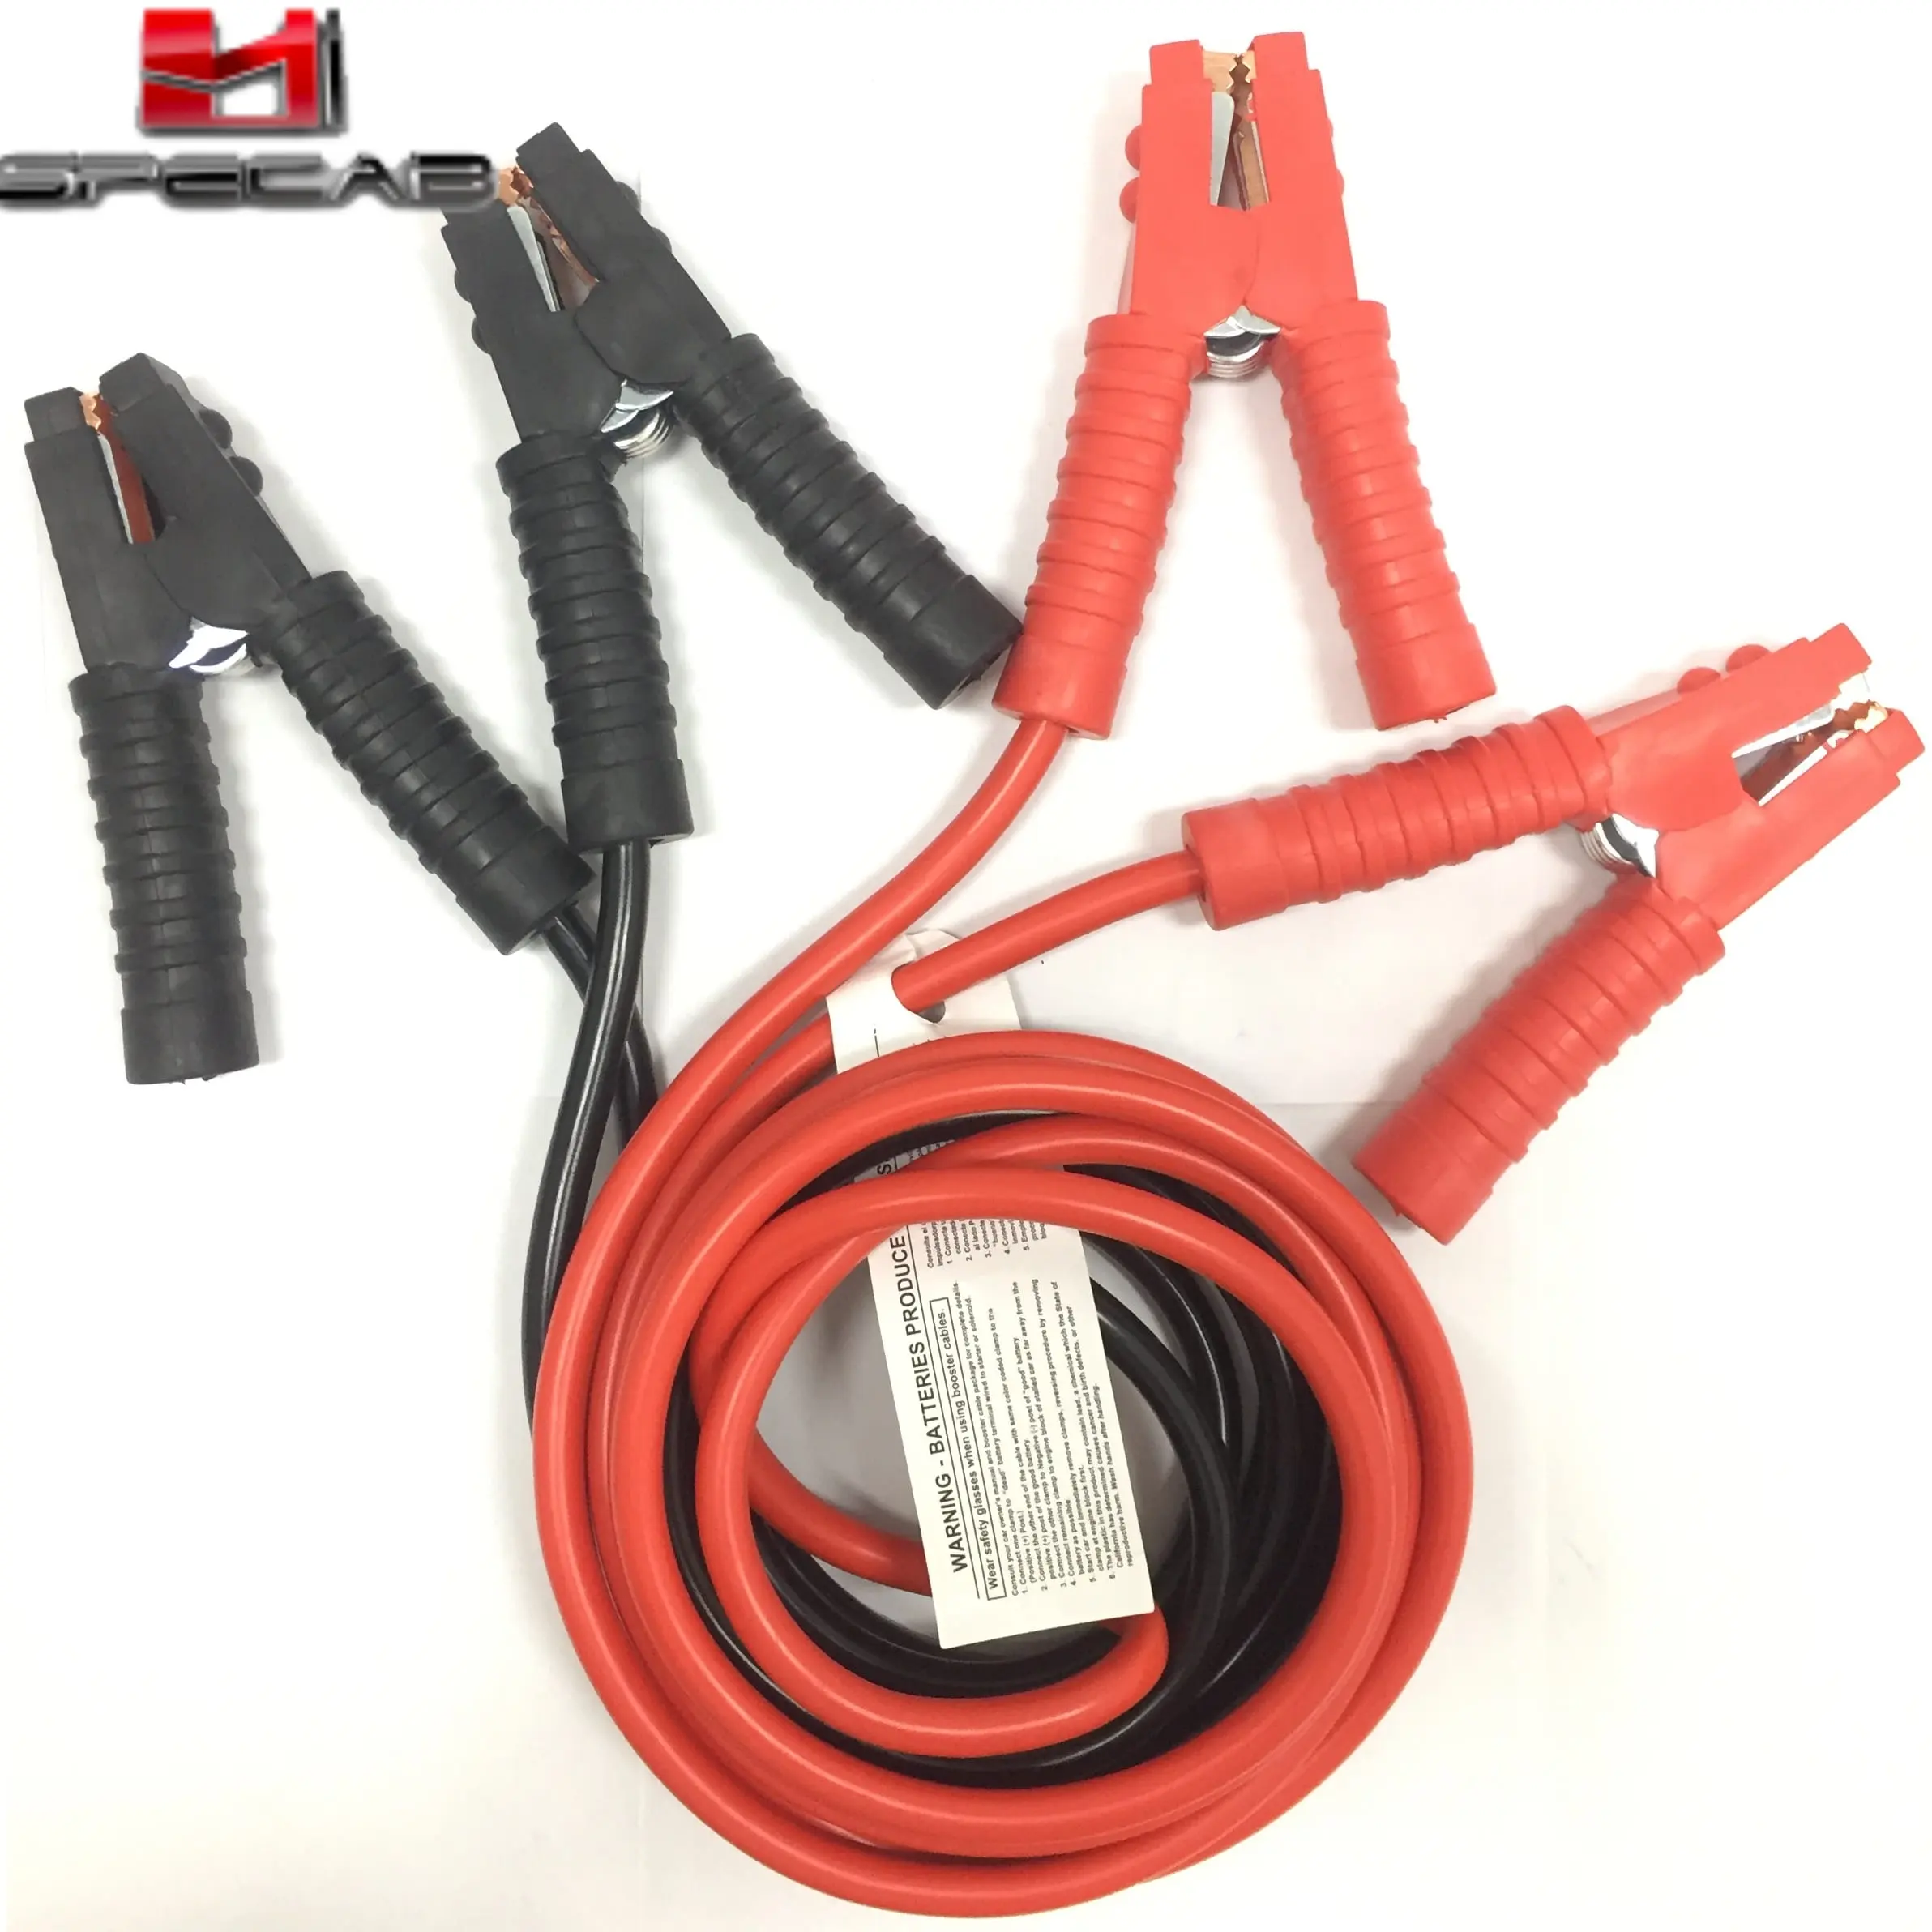 Heavy Duty 2M 1000AMP Car Lead Battery Jump Booster Cable Start Emergency Jumper